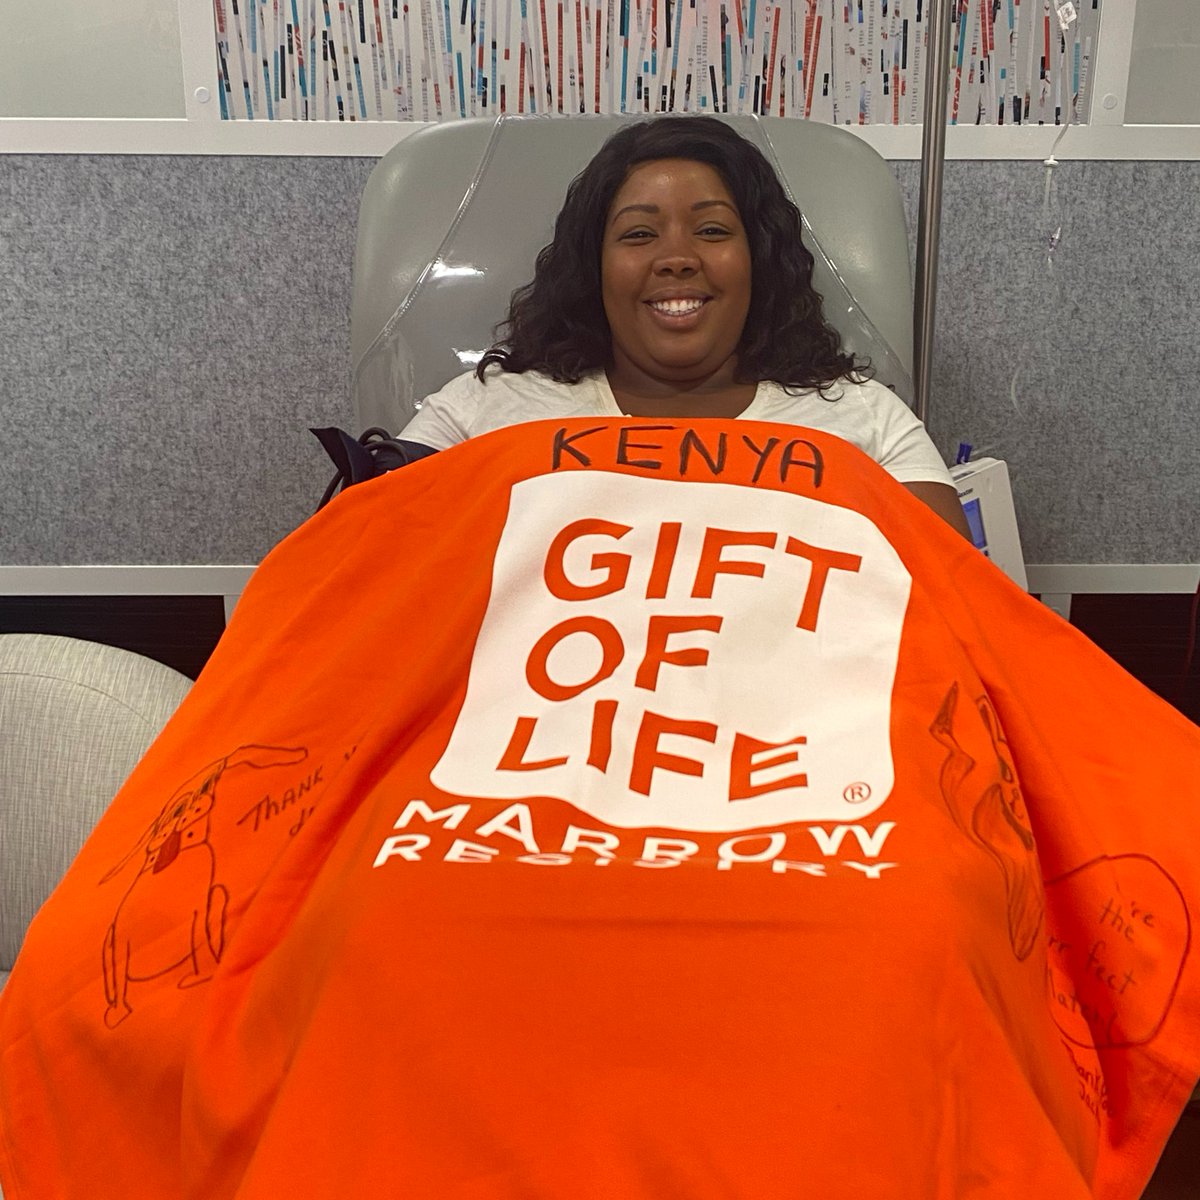 Today's #GOLHero is Kenya!

This mom and wife recently donated stem cells at the collection center to #SaveALife.

Thank you for giving the #GiftOfLife, hero!